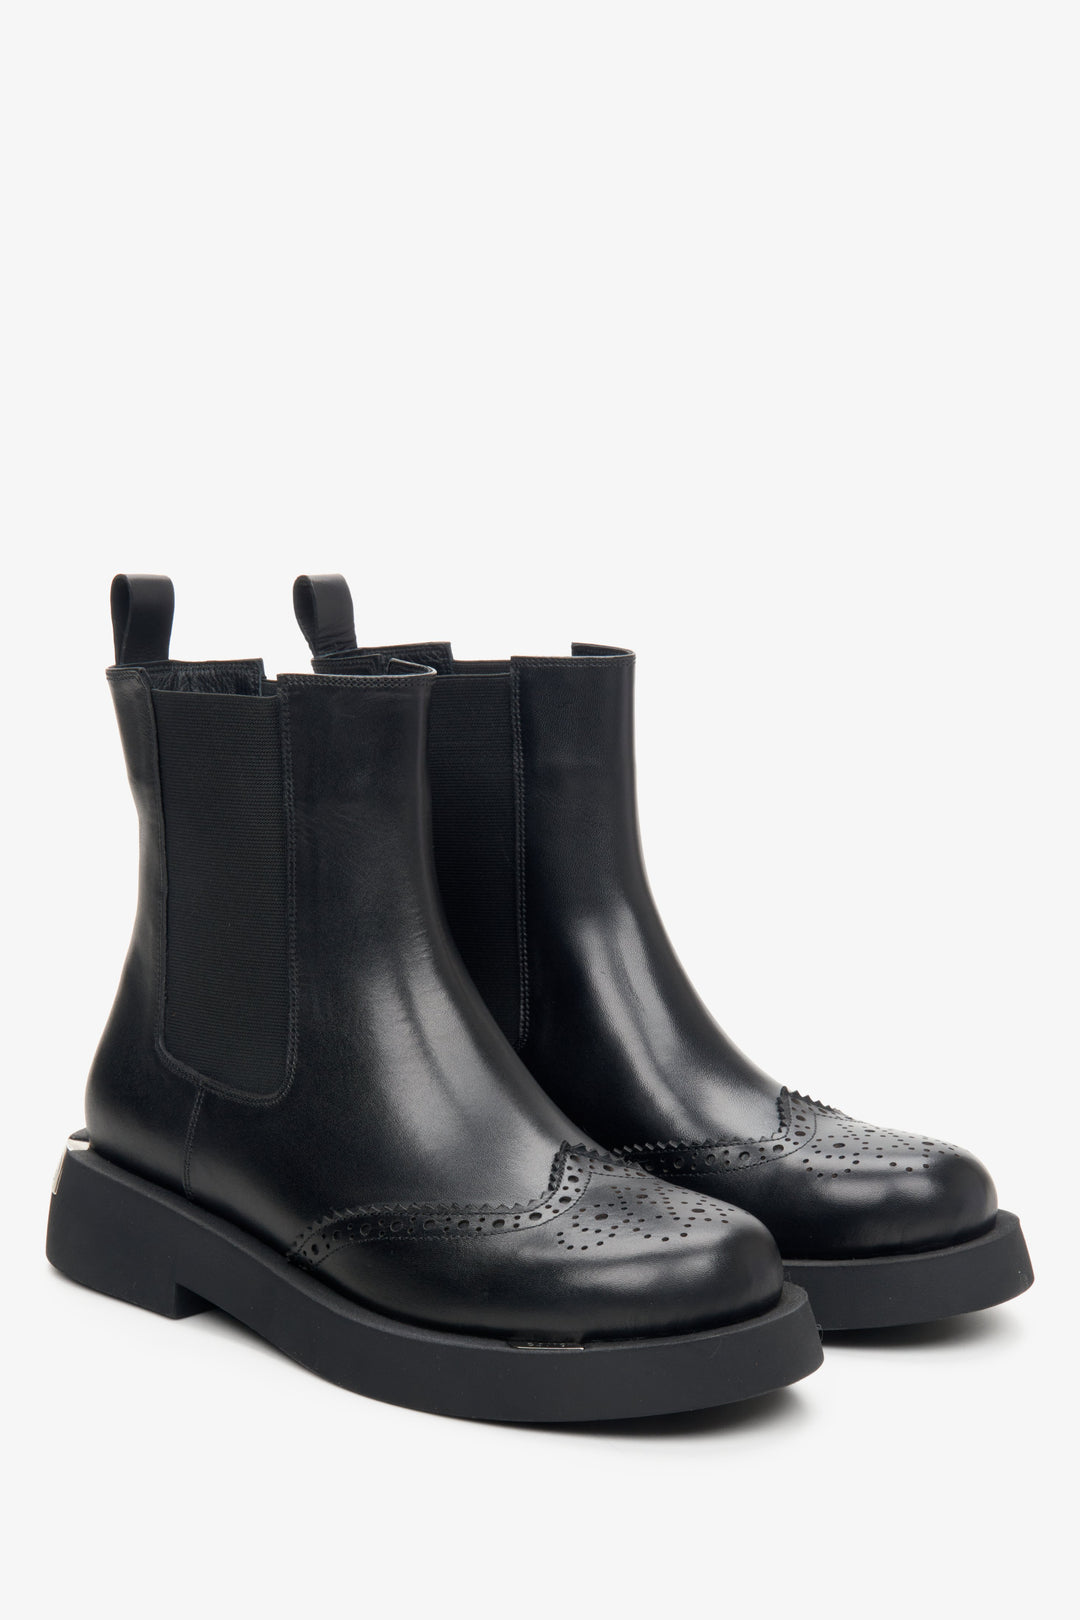 Women's black chelsea boots made of genuine leather with perforation by Estro.